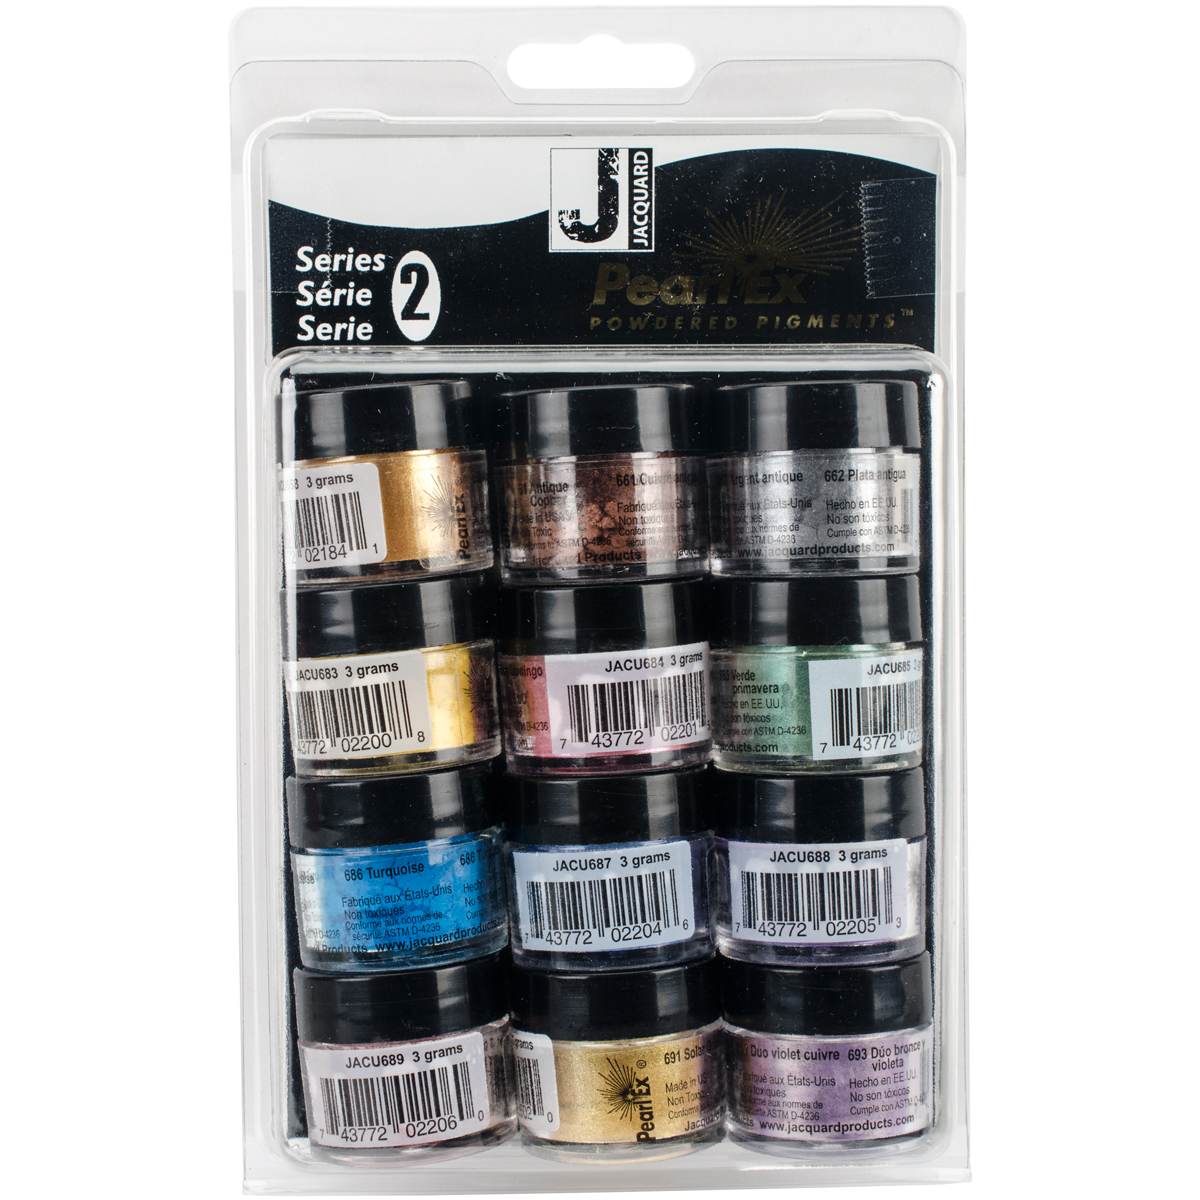 Jacquard Pearl Ex Powdered Pigments 3g 12/Pkg-Series 2 - Picture 1 of 1